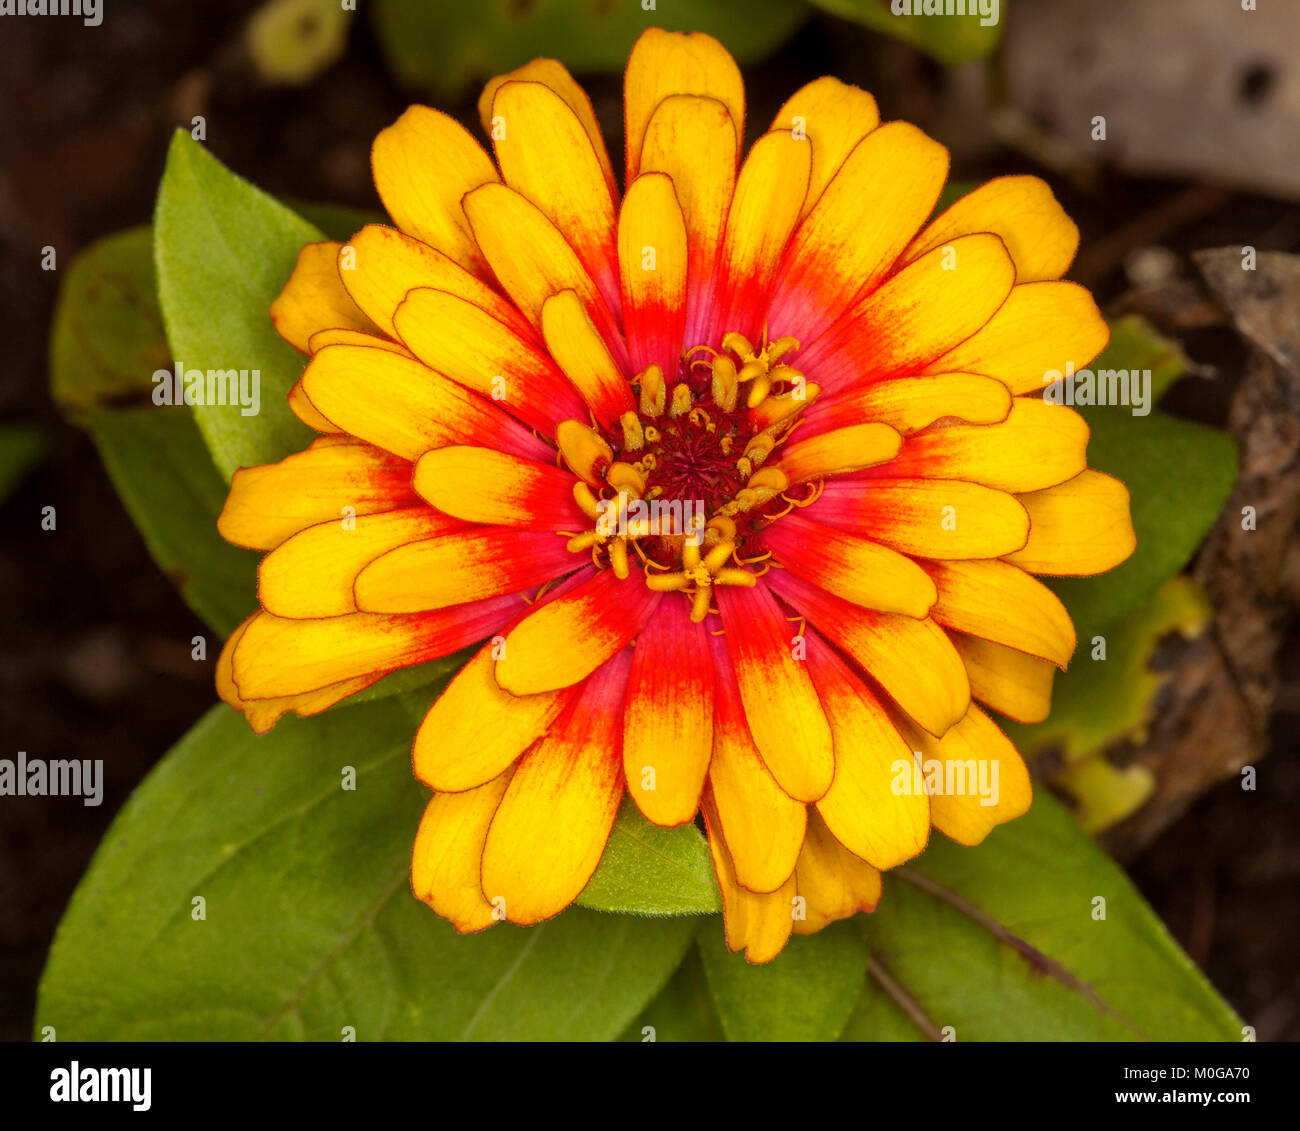 Vivid orange and red flower of annual Zinnia grandiflora 'Swizzle' Scarlet and Yellow on background of green leaves Stock Photo